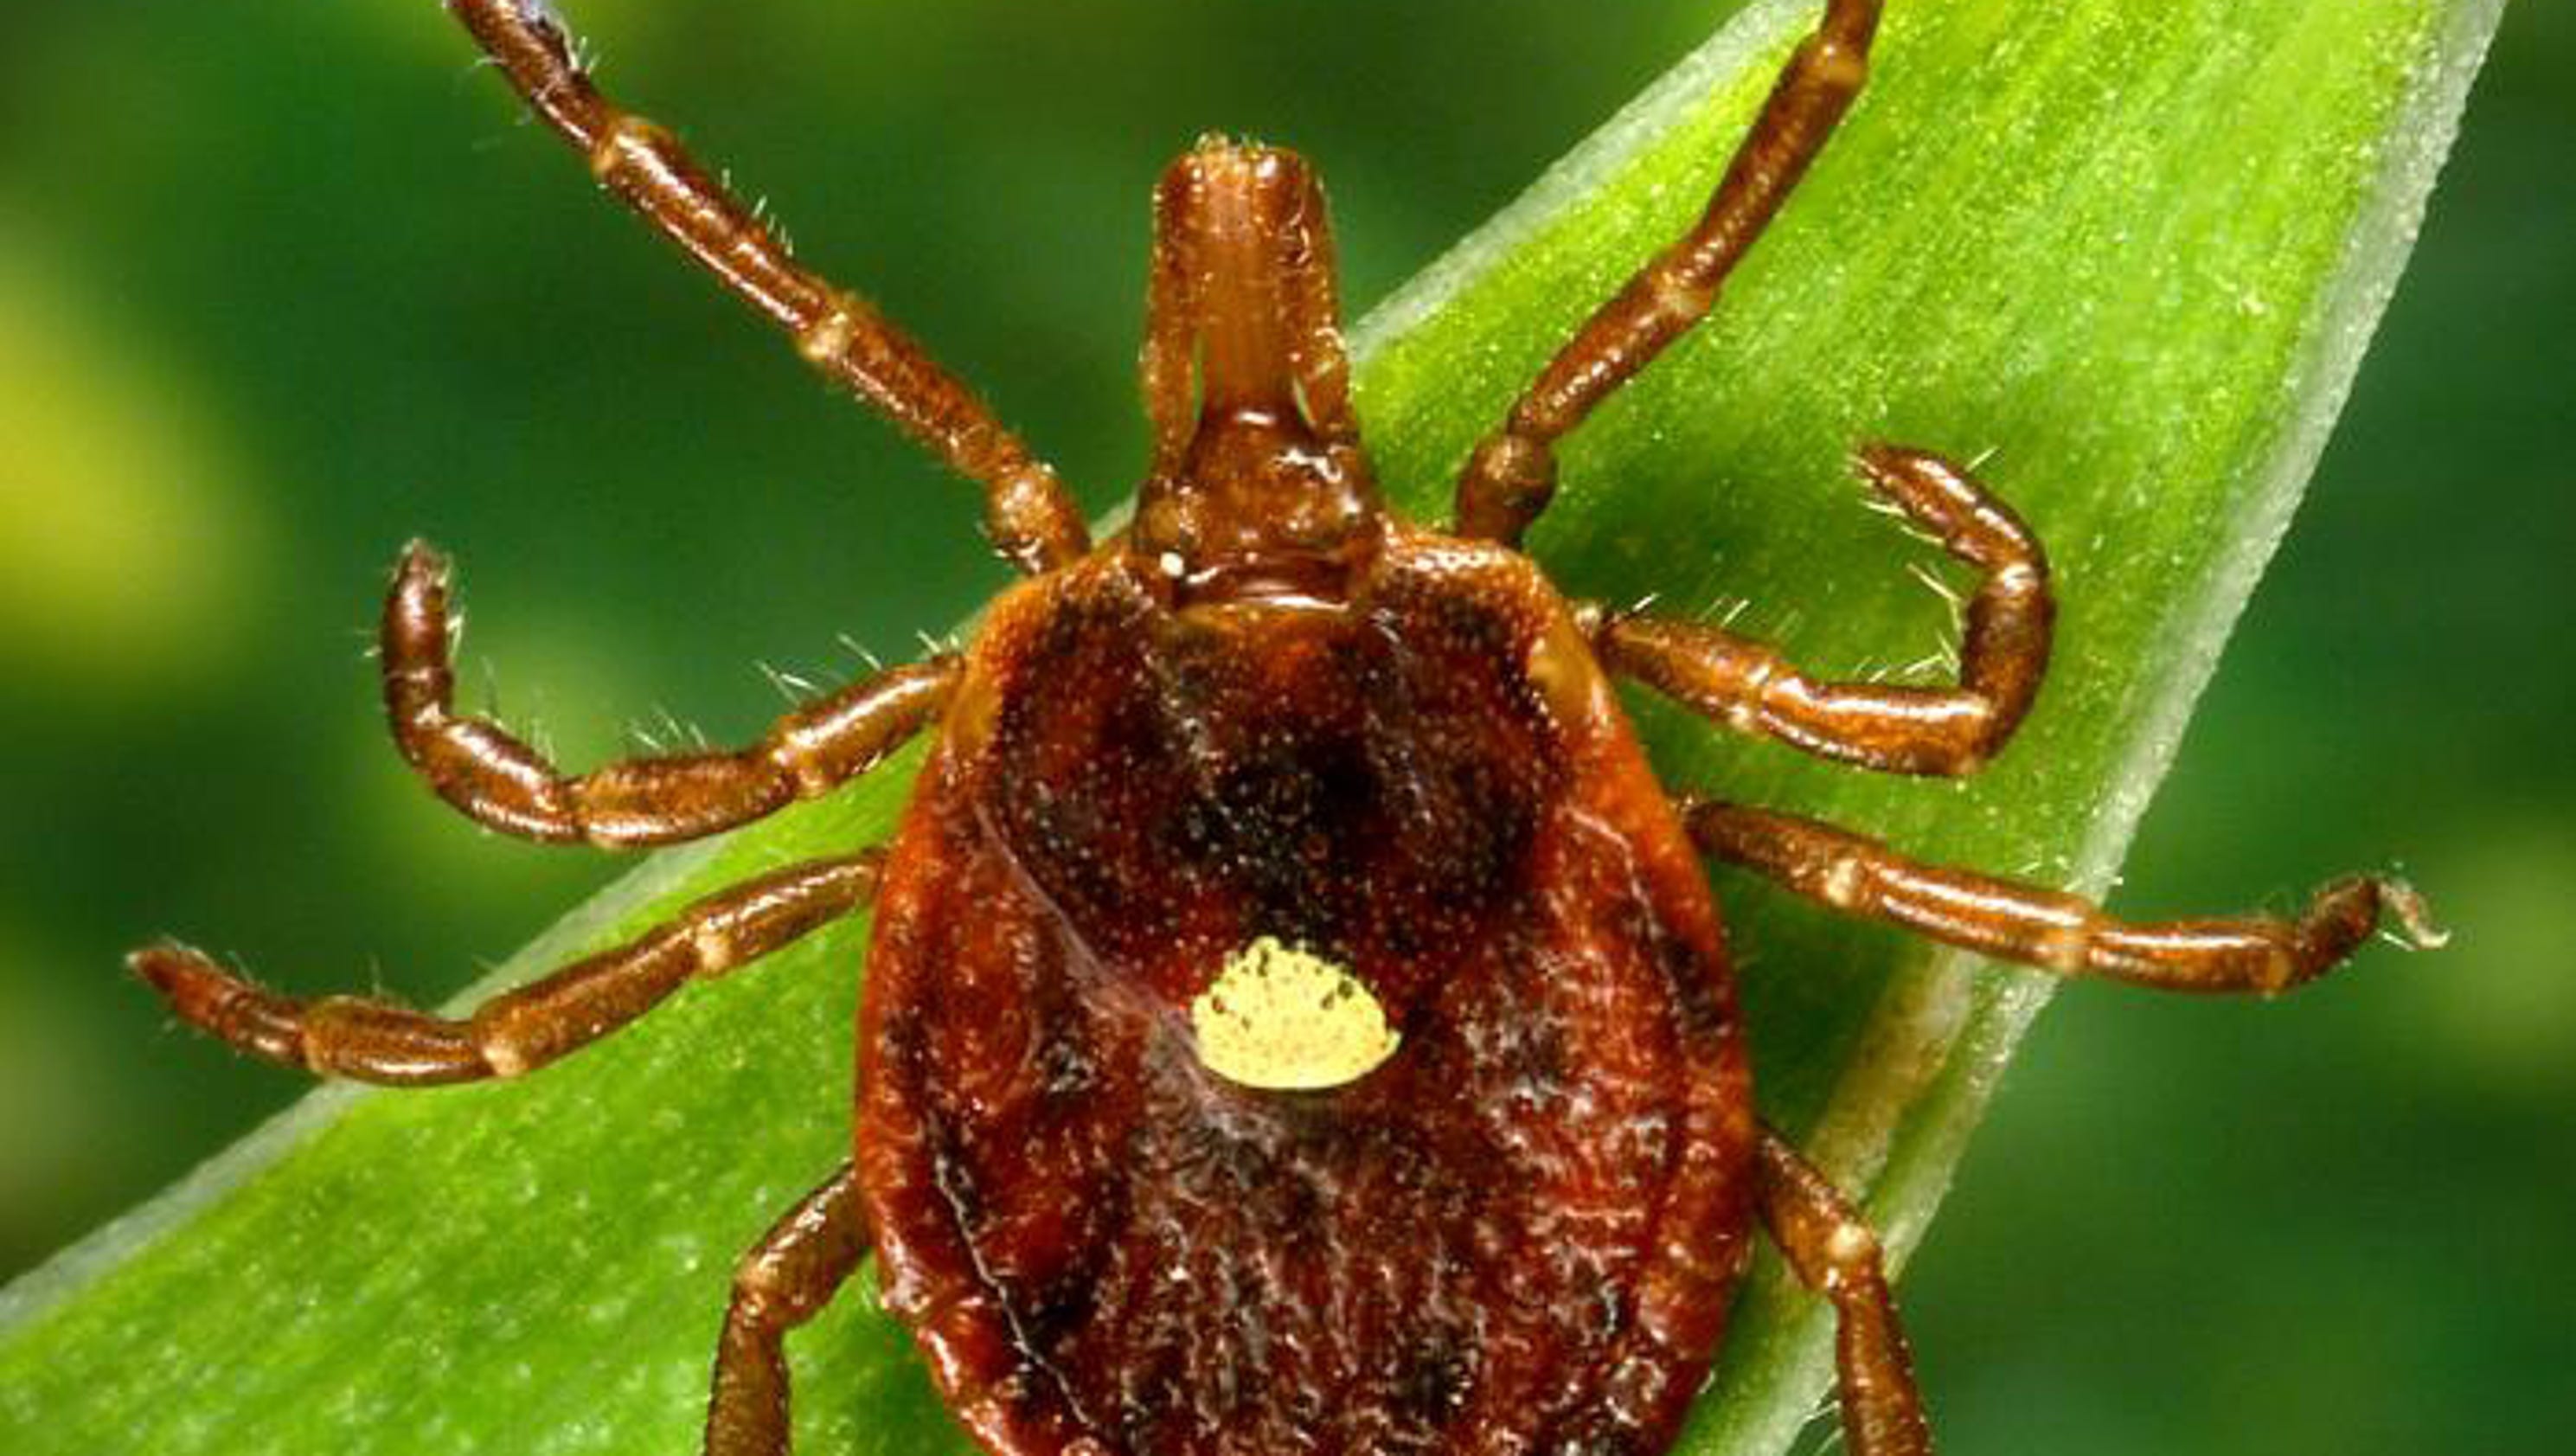 Lyme disease explained: Symptoms, ticks, treatments and the states where cases occur